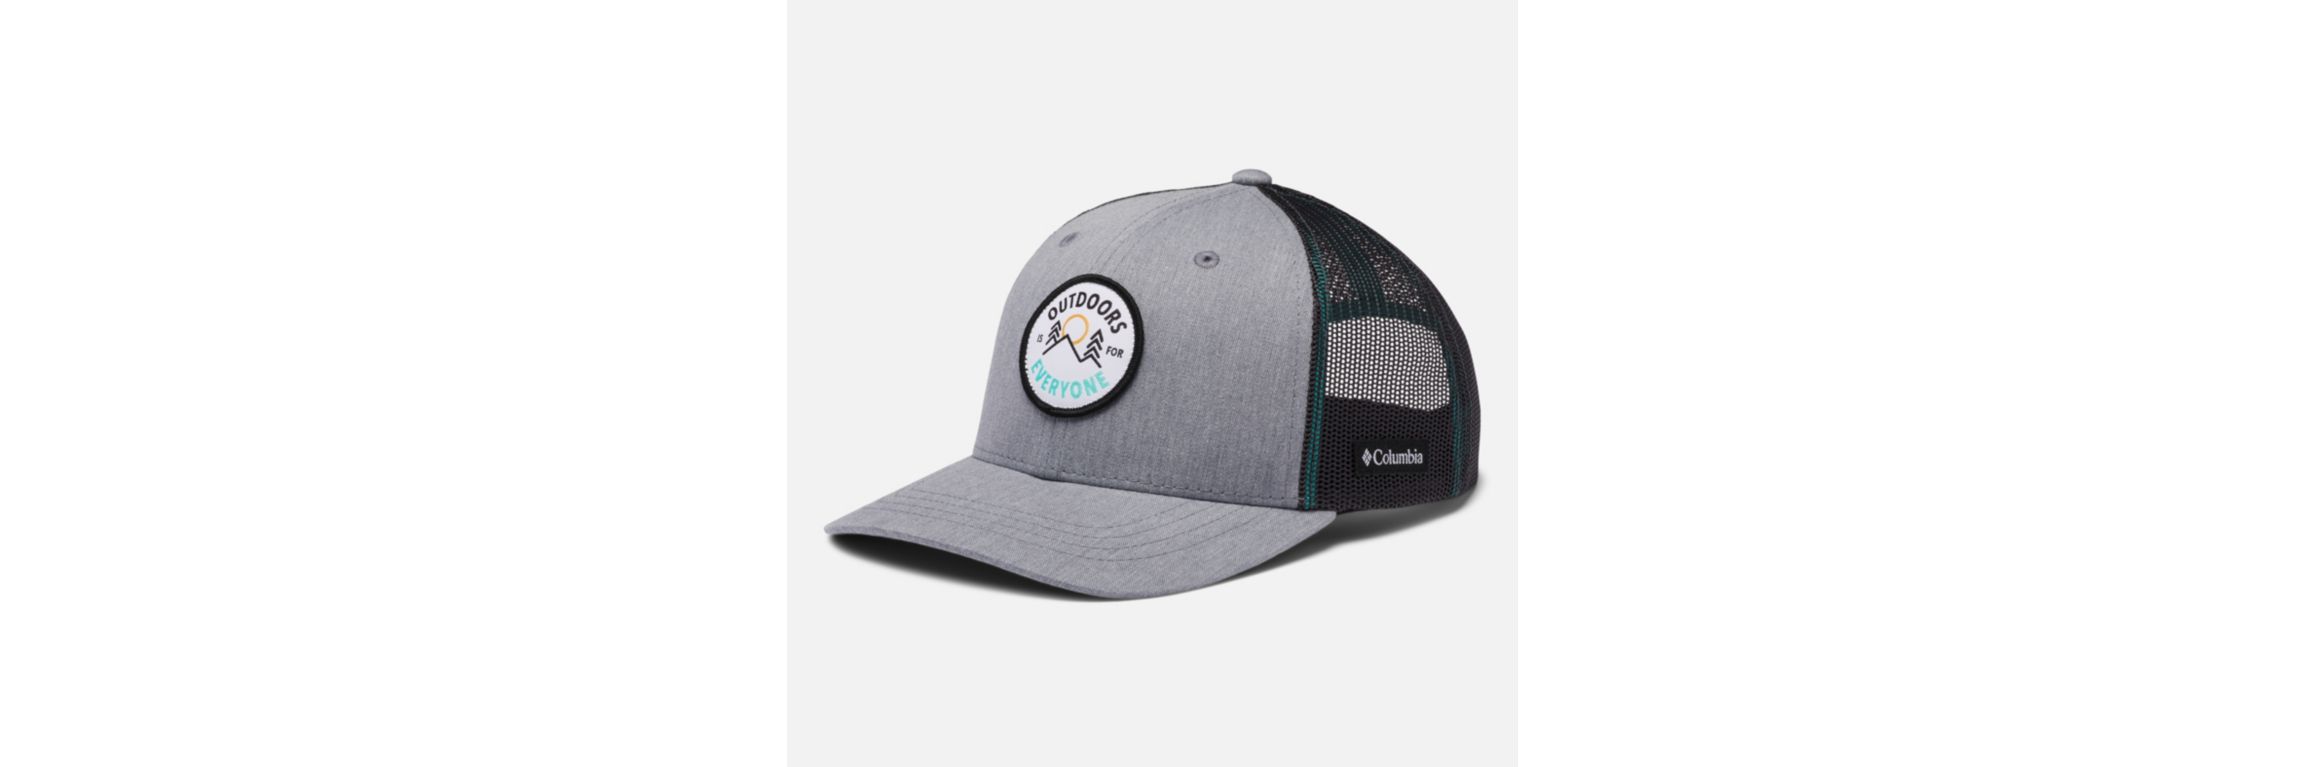 Columbia ™ Youth Snap Back, 019